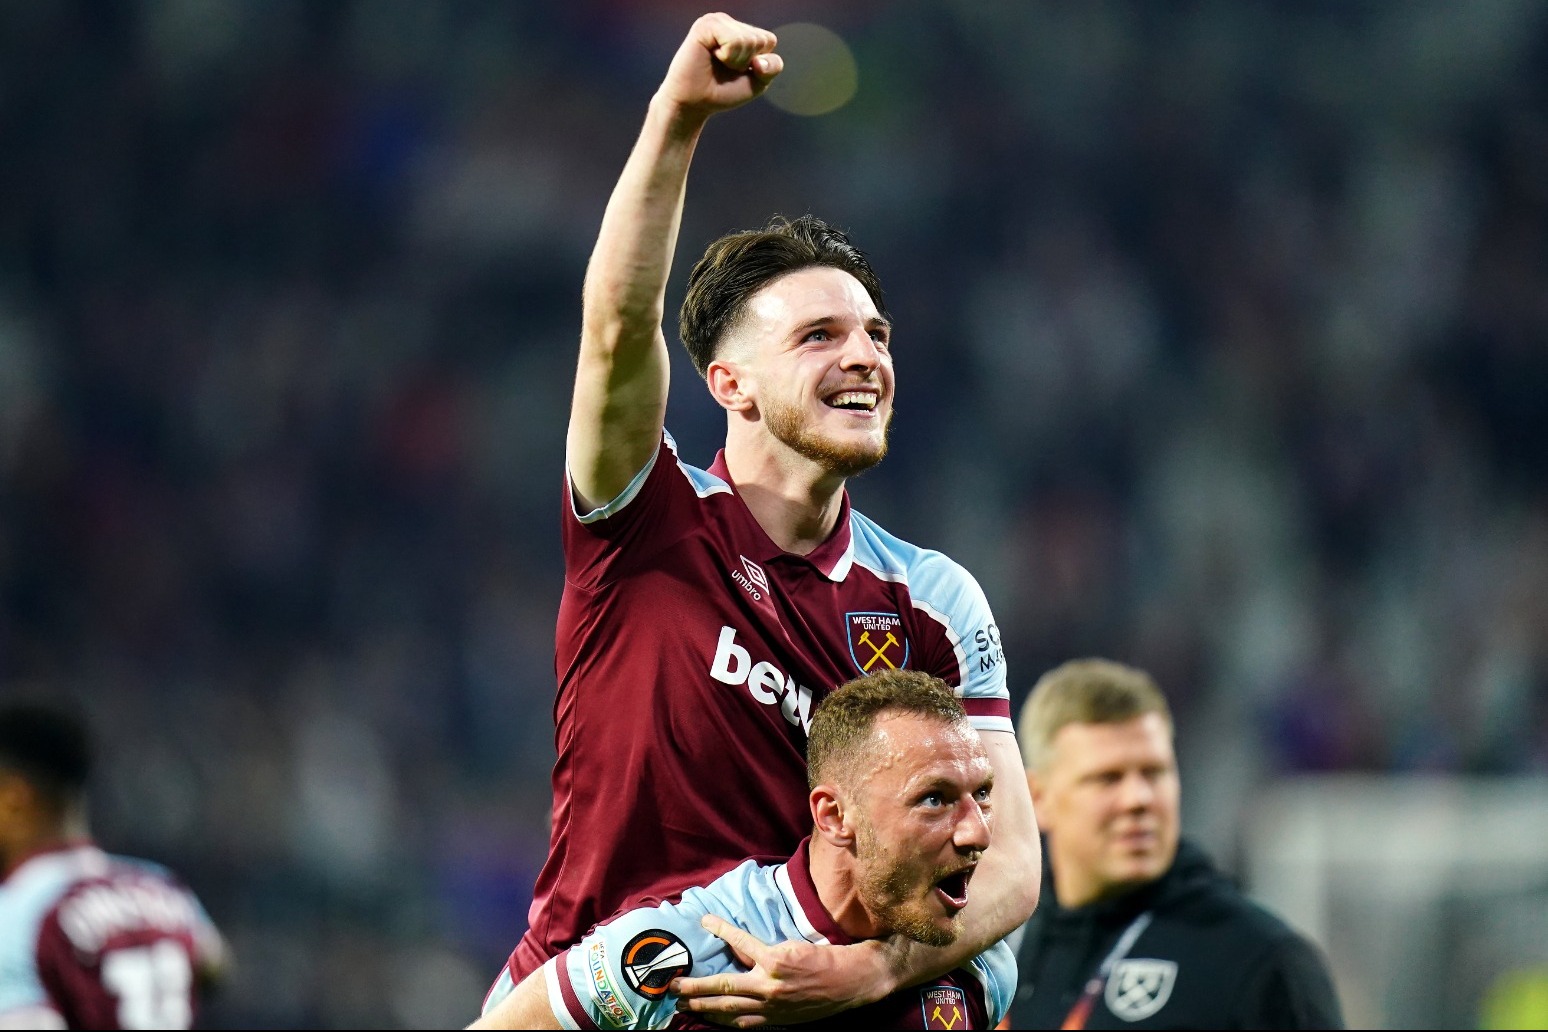 West Ham and Rangers through to semi finals of Europa League